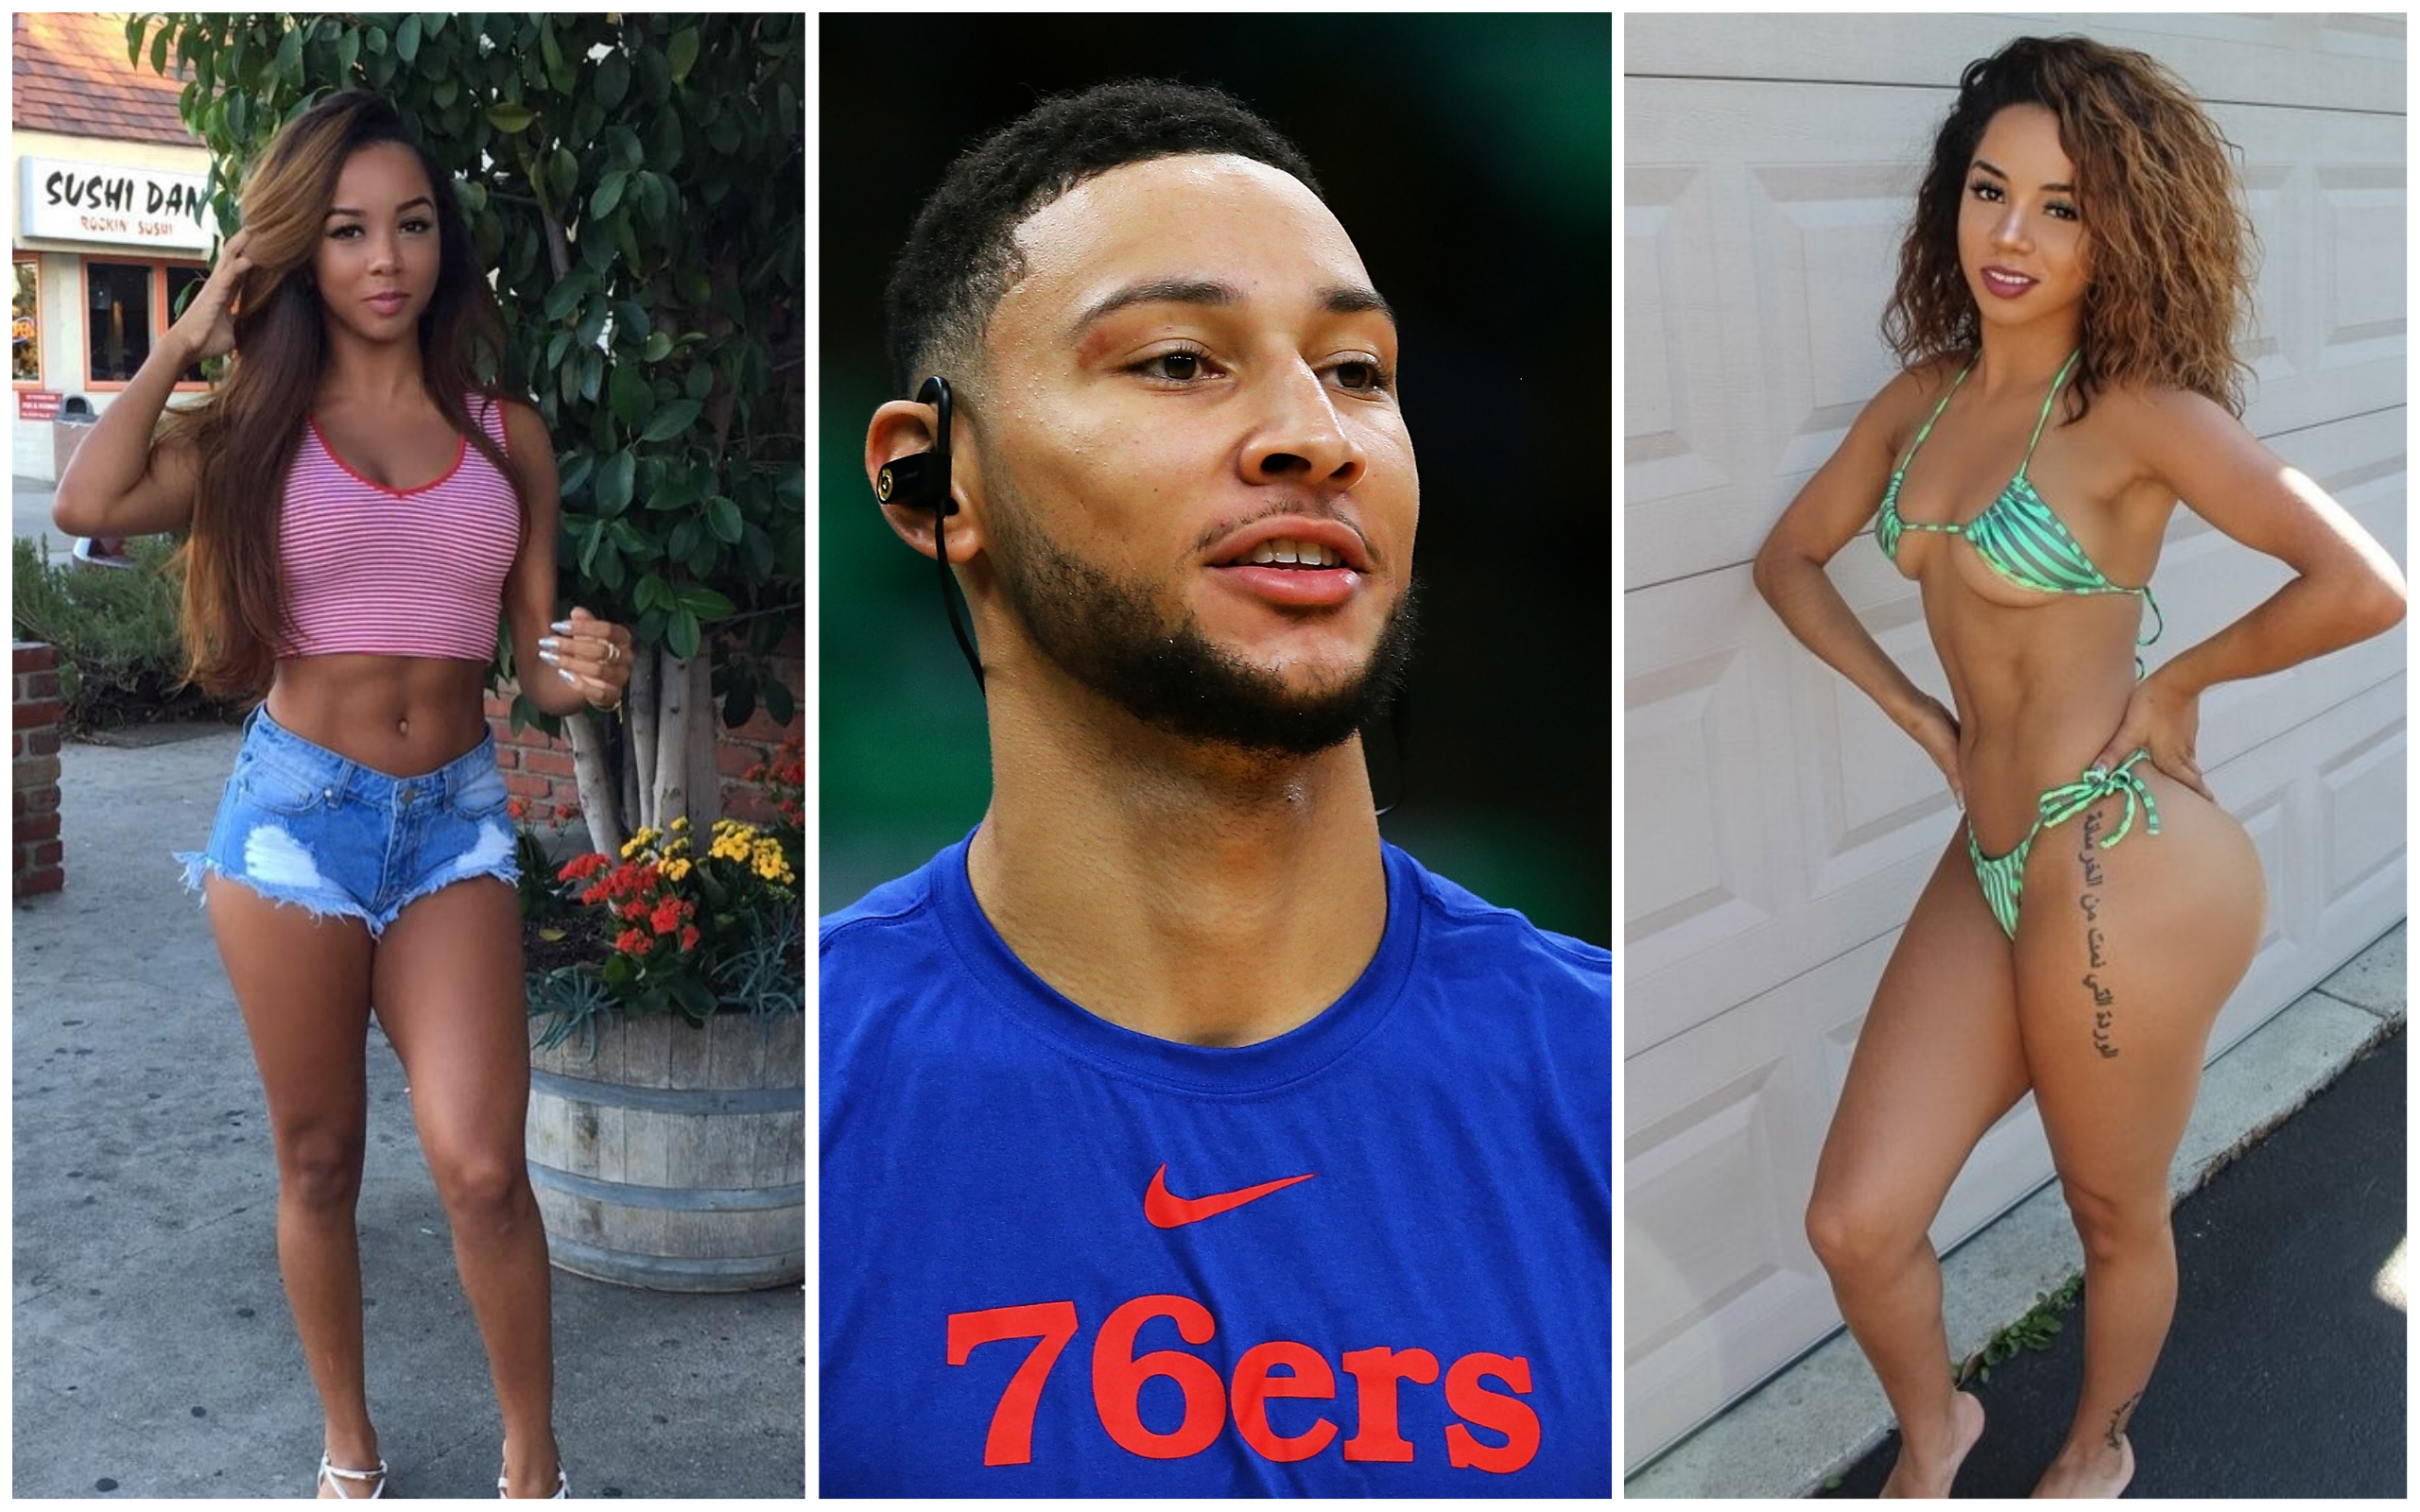 Brittany renner teanna trump porn Brittany Renner Says She Had To Study Porn Star Teanna Trump To Properly Give Ben Simmons Fellatio Total Pro Sports